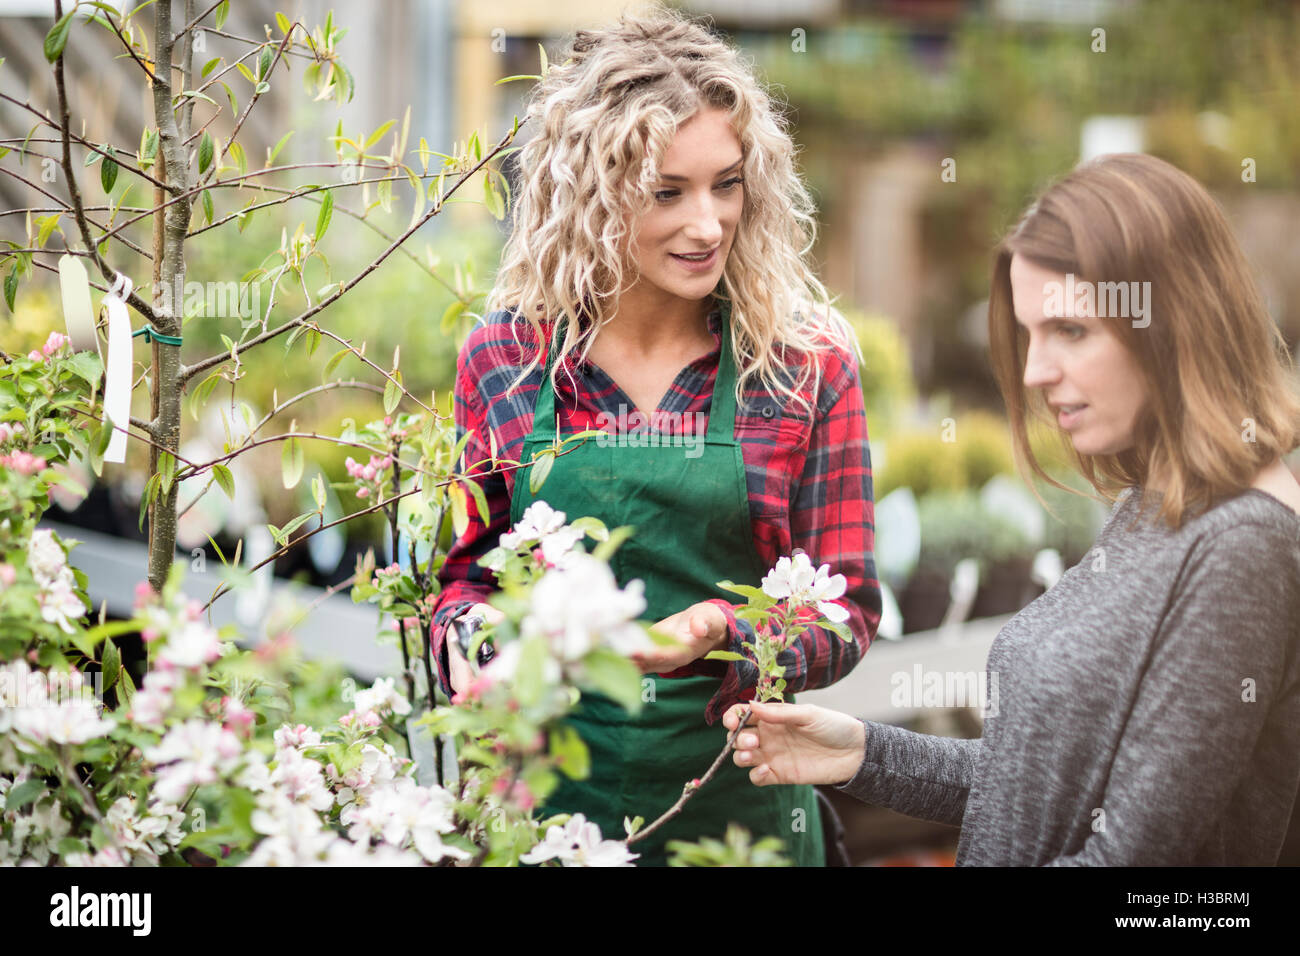 Florist giving advice to woman shopping for flowers Stock Photo